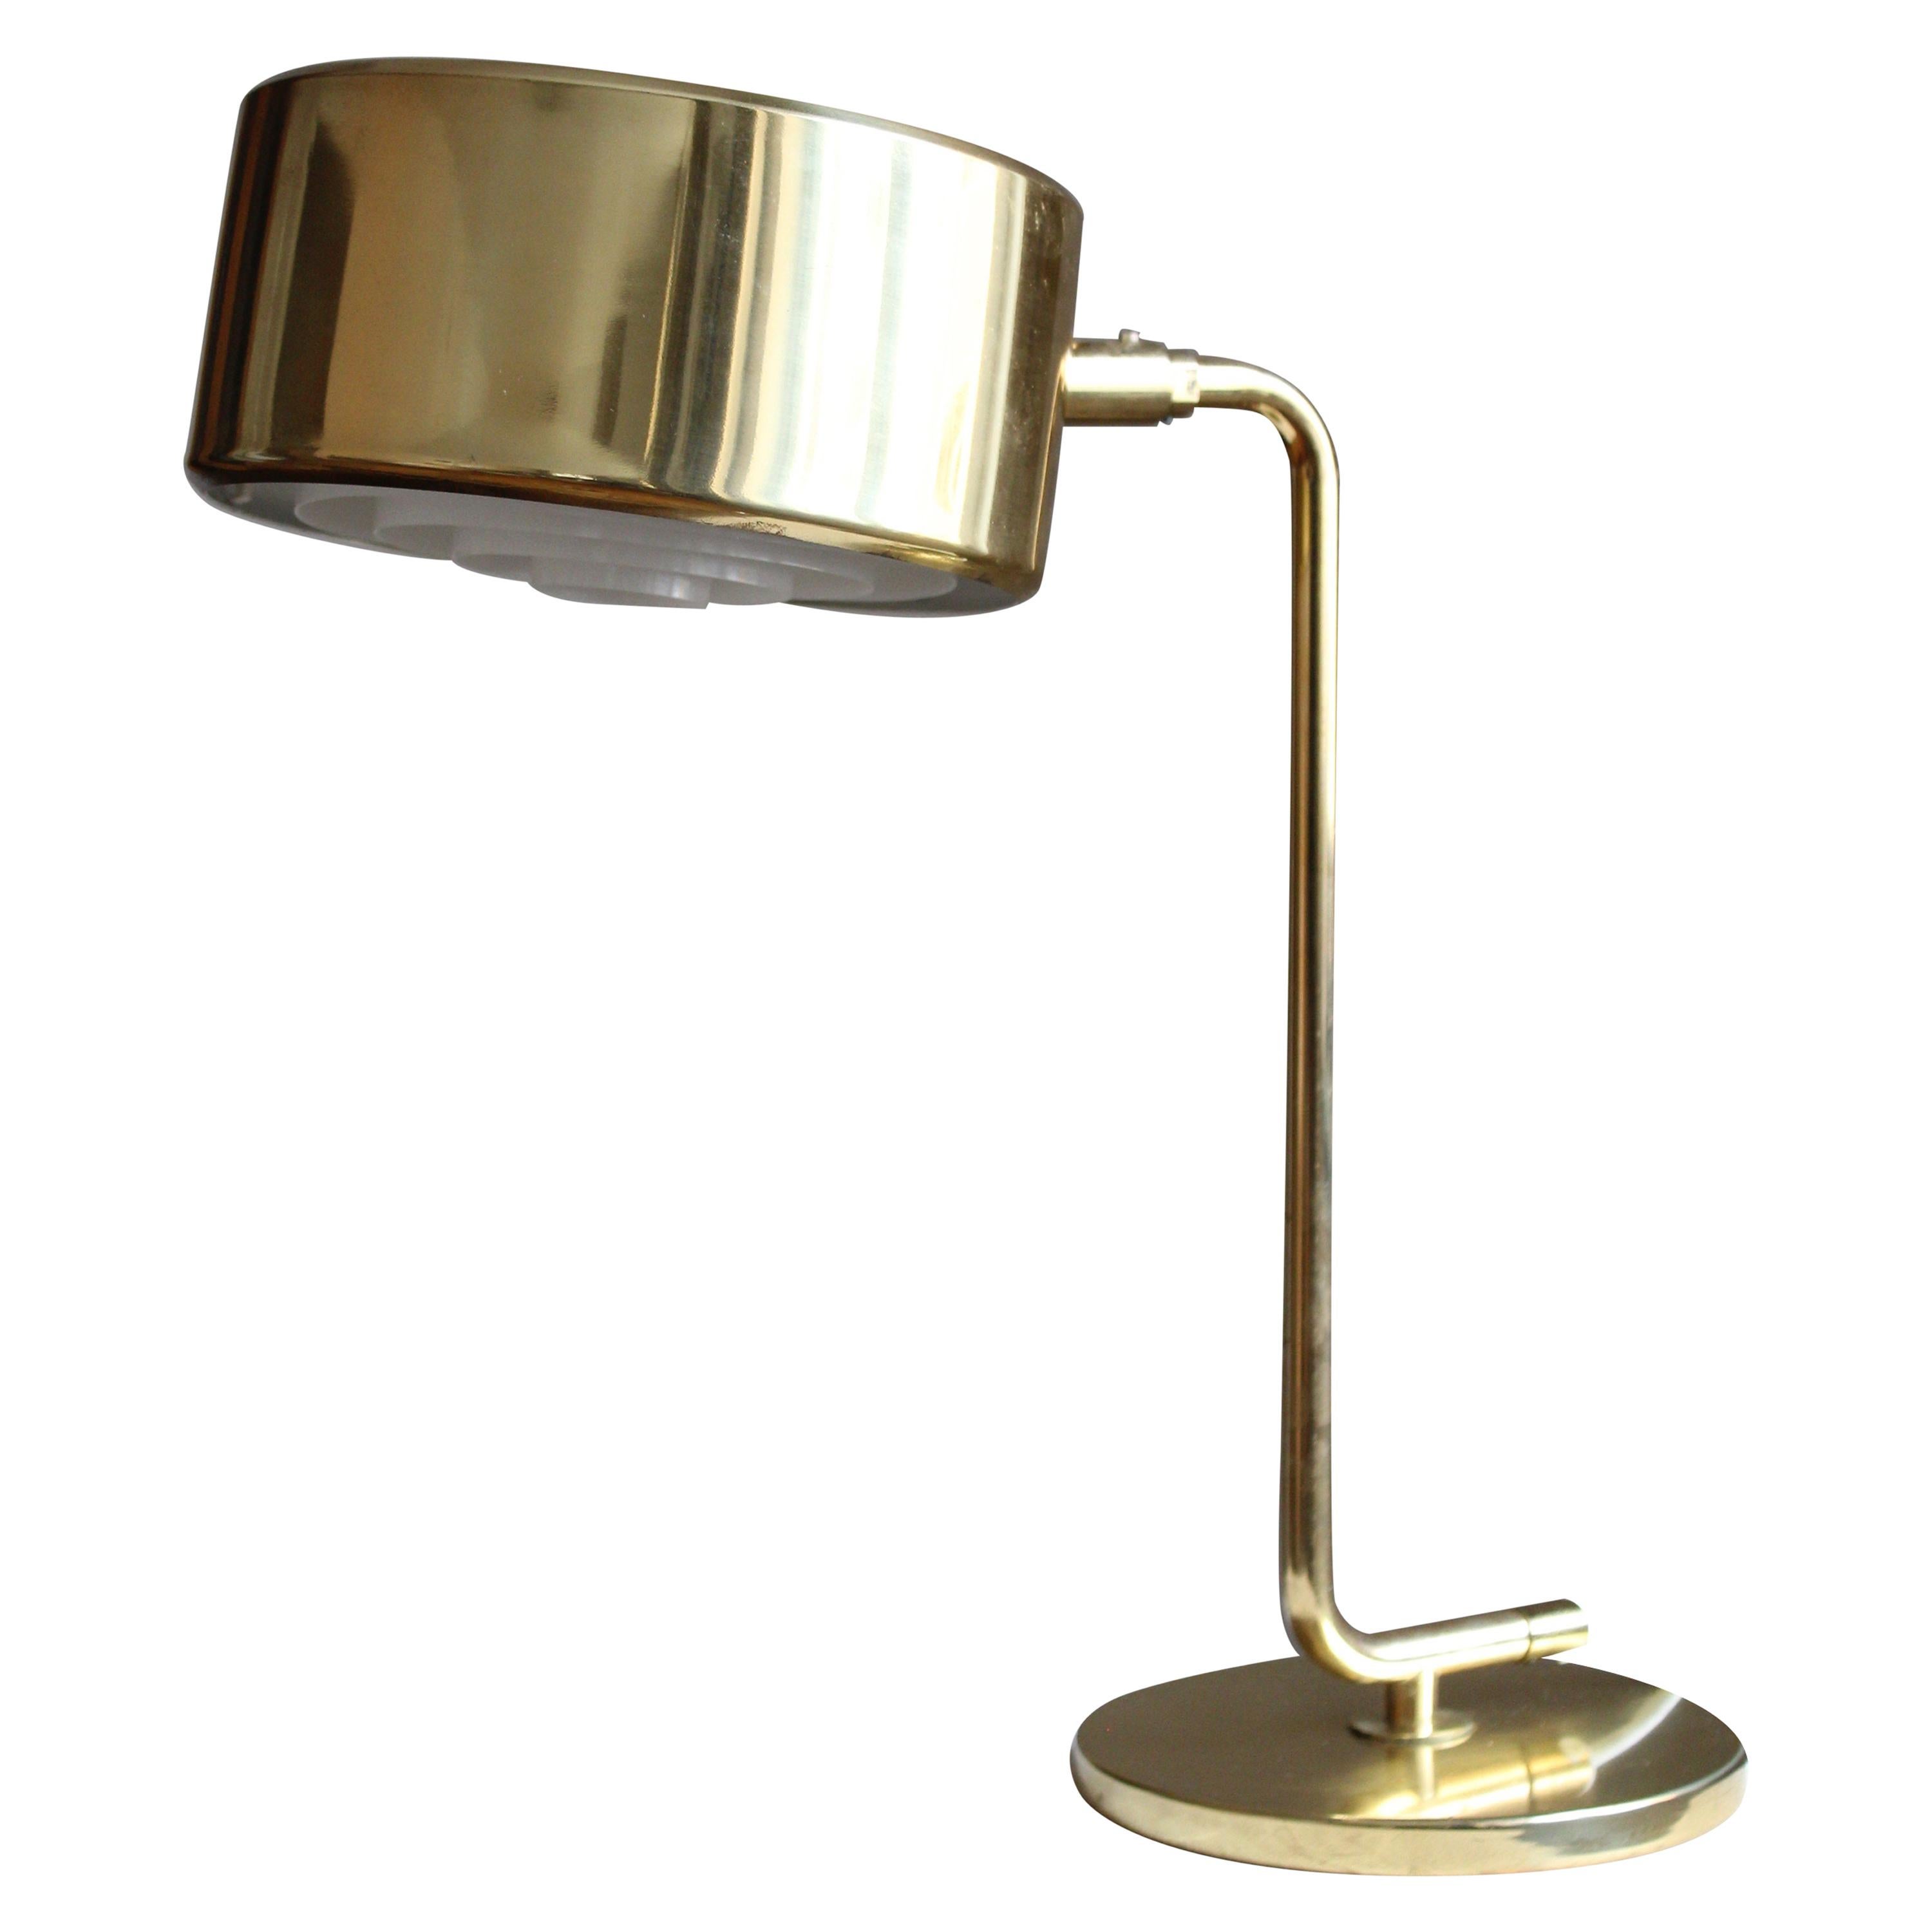 Anders Pehrson, Rare "Stekpannan" Table Lamp, Brass, Ateljé Lyktan, Sweden  1970s For Sale at 1stDibs